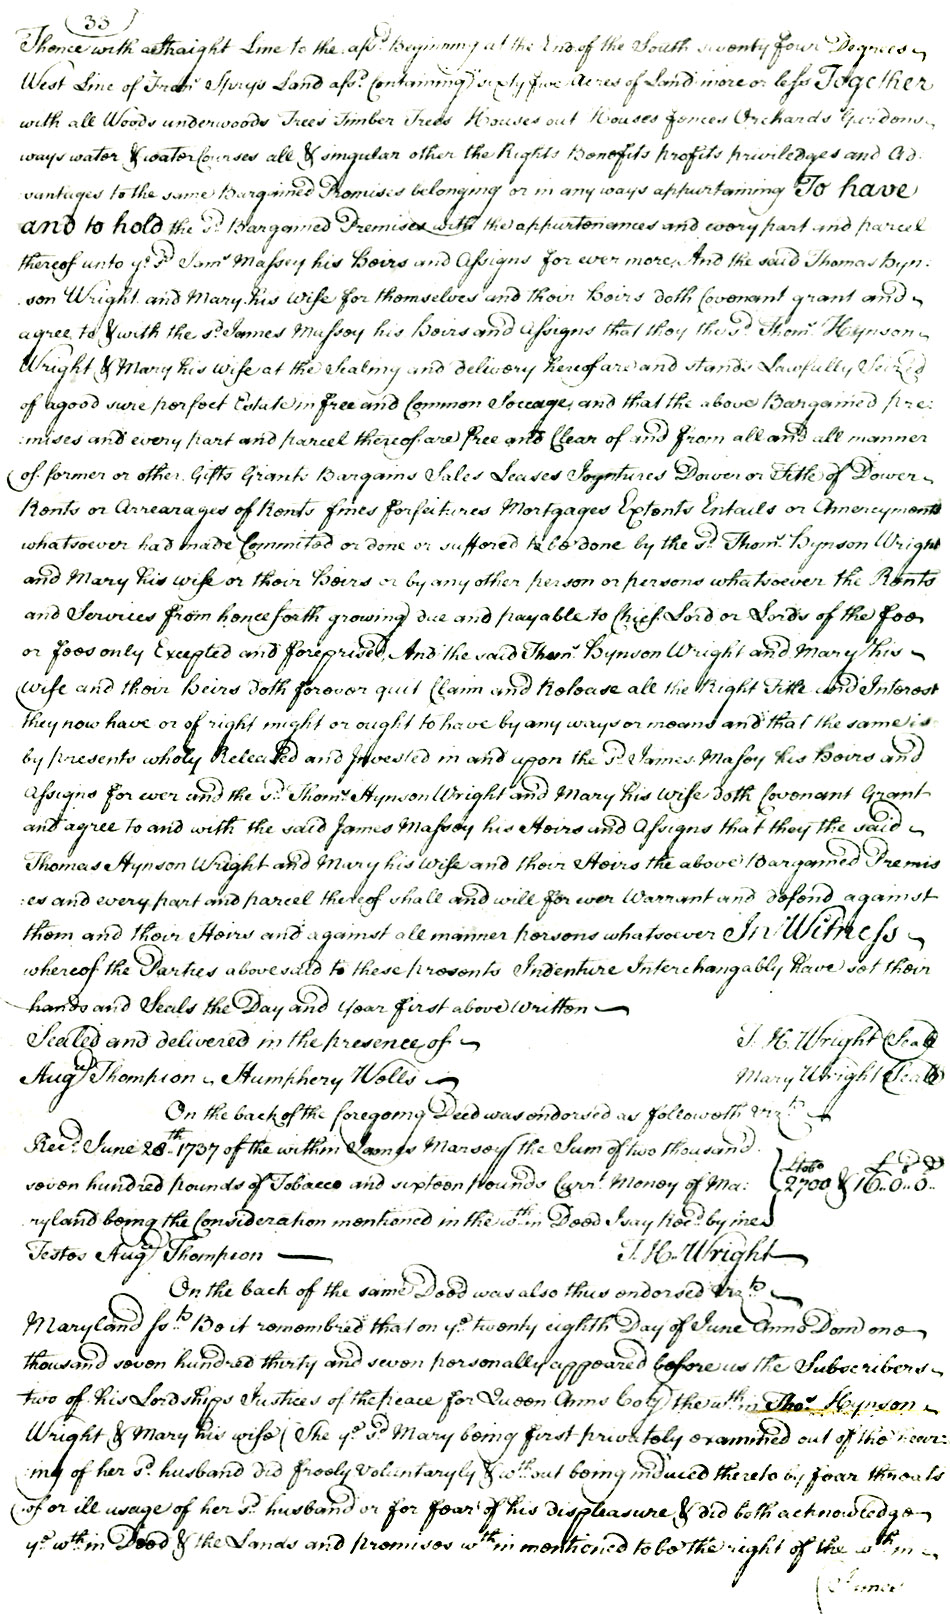 Queen Anne's County, Maryland: Thomas Hynson Wright to James Massey, June 28, 1737